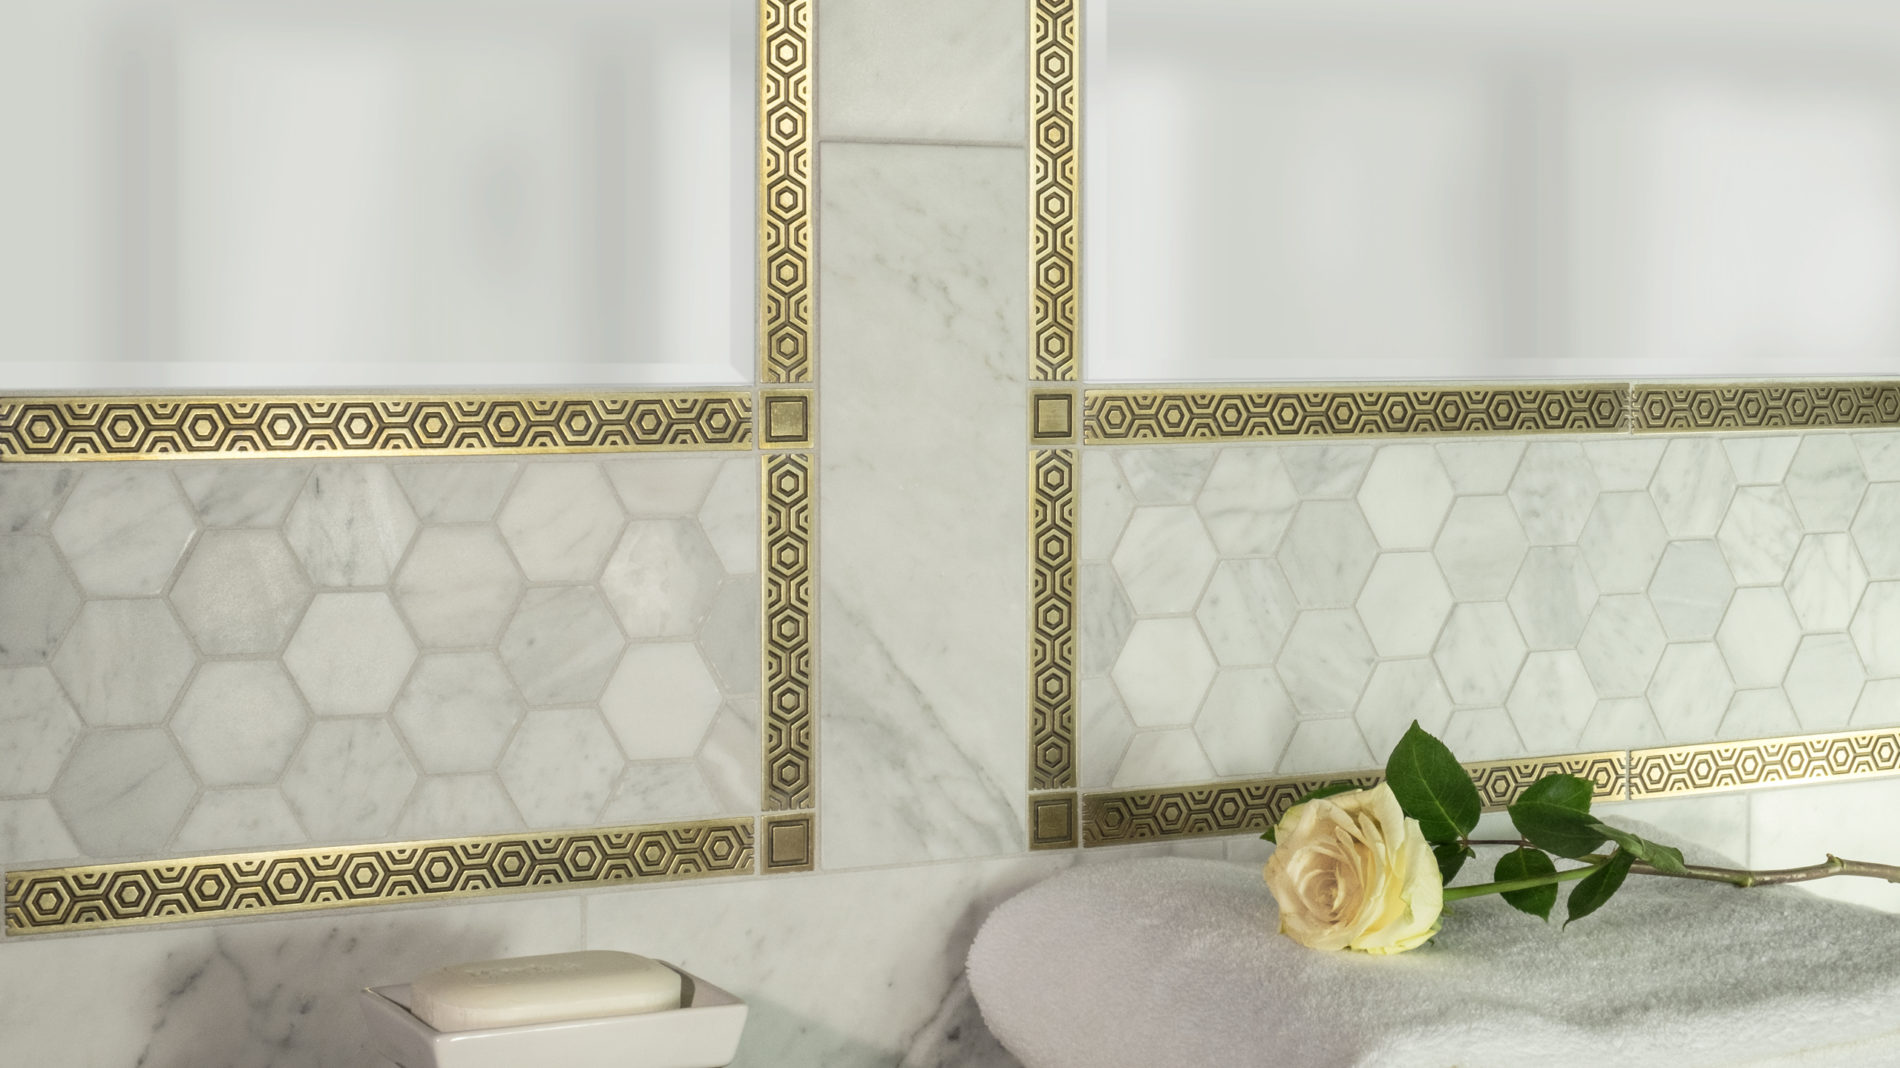 Bronzework Studio Autograph Square inset and Bebop graphic metal accent liner tile with white marble mirror